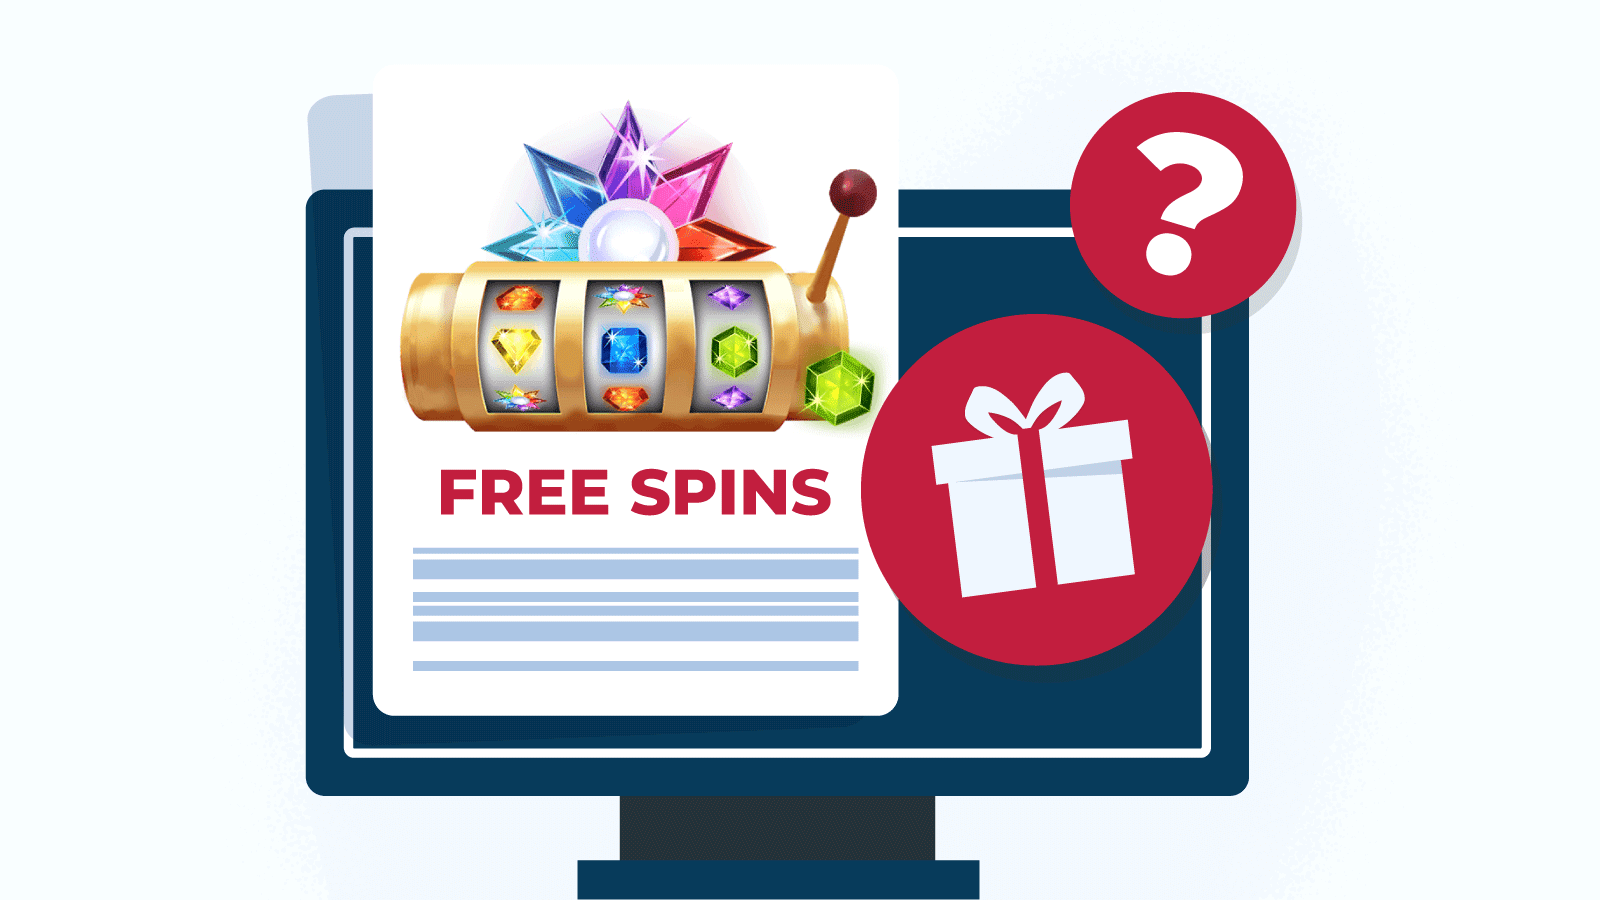 What are Starburst free spins